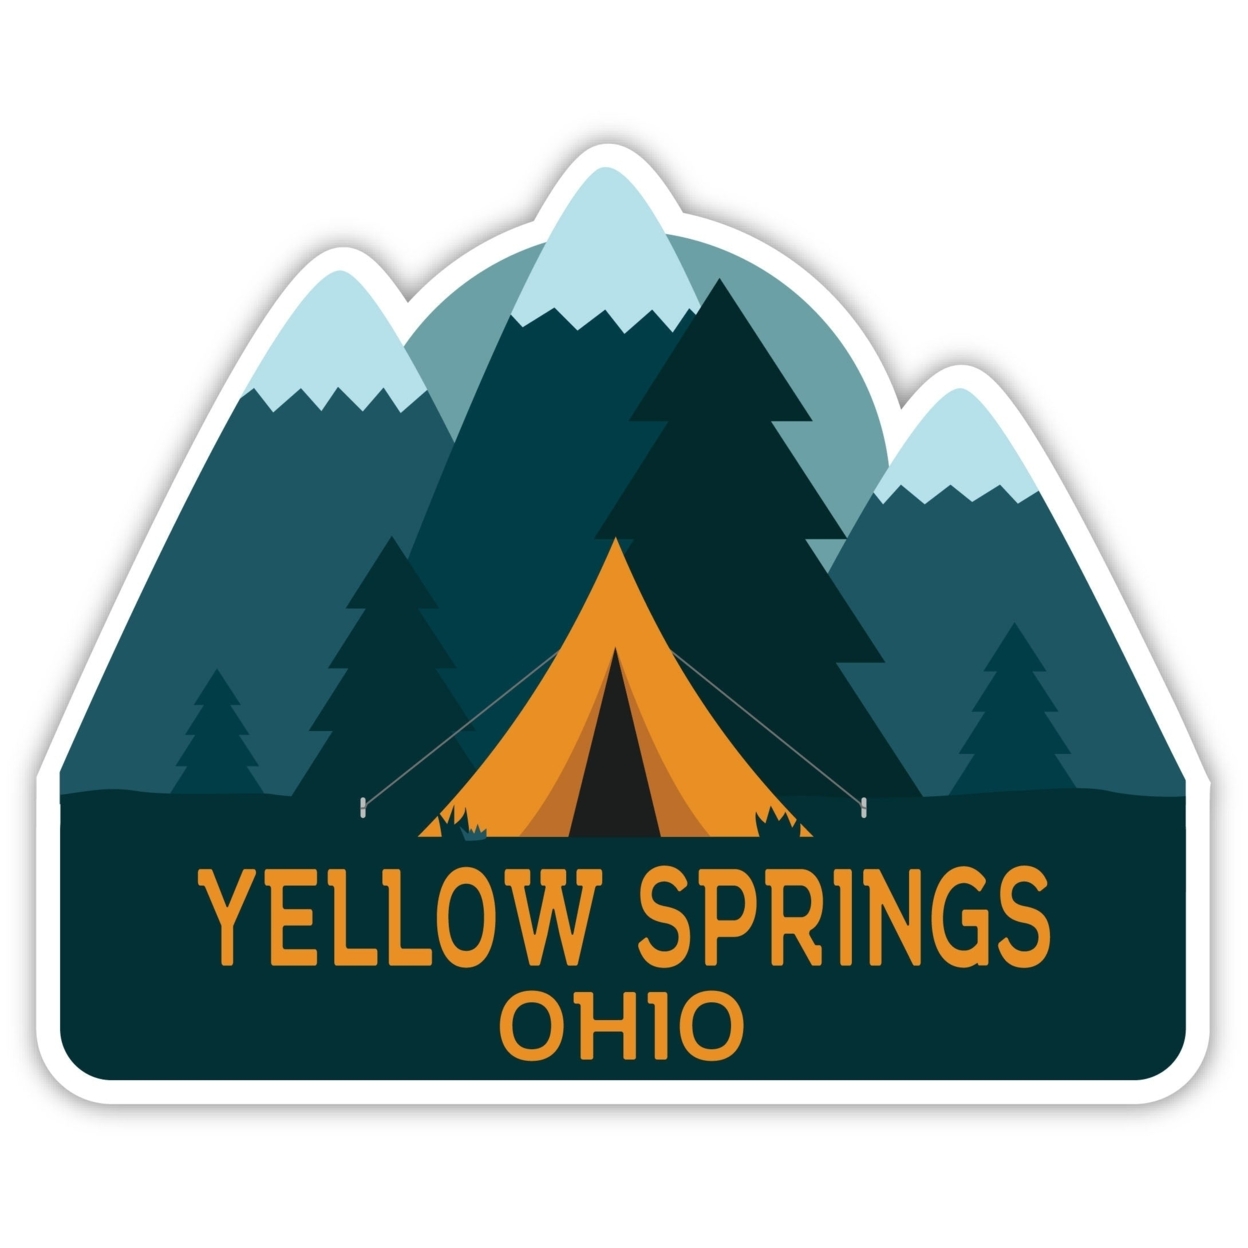 Yellow Springs Ohio Souvenir Decorative Stickers (Choose Theme And Size) - Single Unit, 4-Inch, Tent